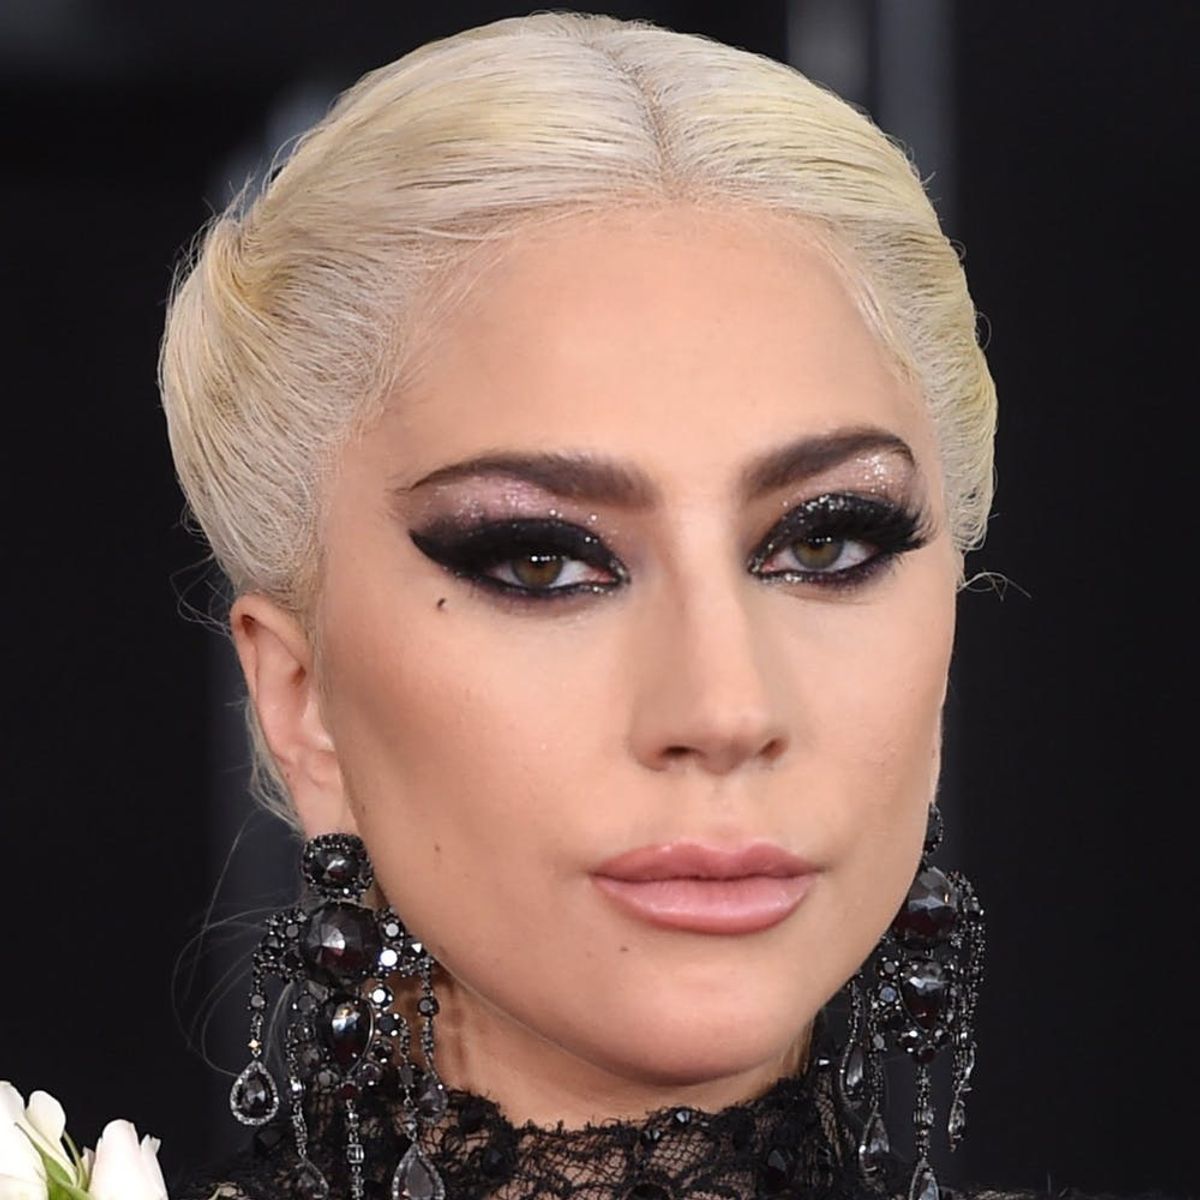 Lady Gaga Cancels the Rest of Her World Tour With a Heartbreaking Note to Fans 